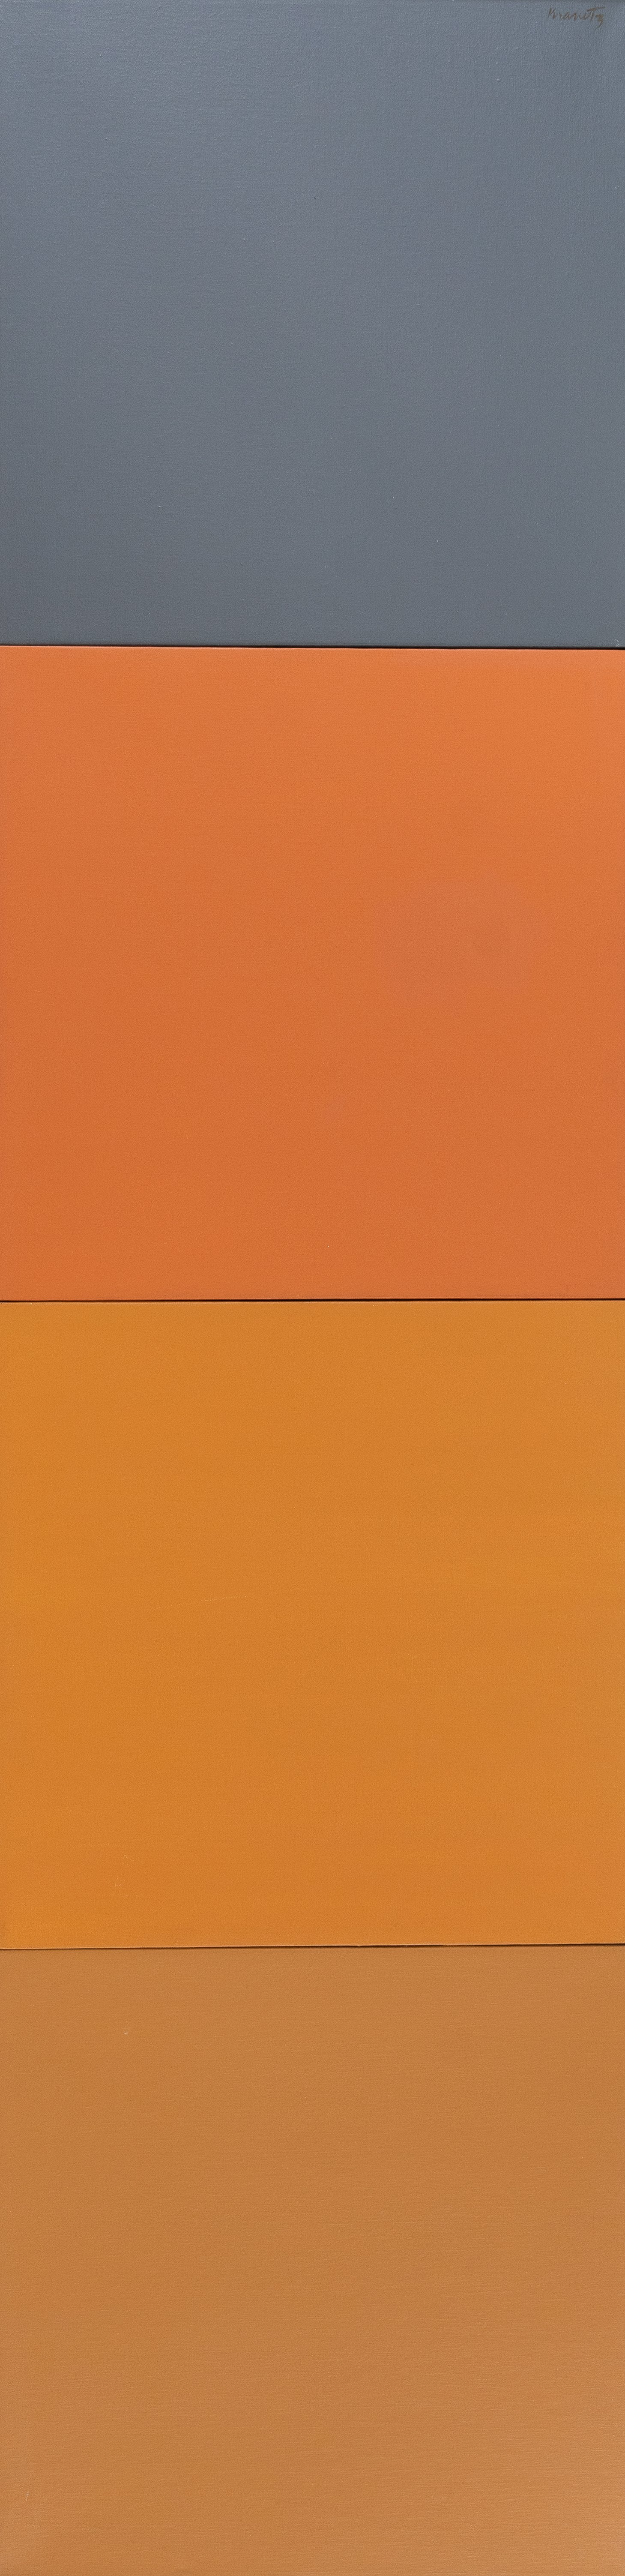 Canyon Colors II, 1971, acrylic on canvas, 77x19.5 inches